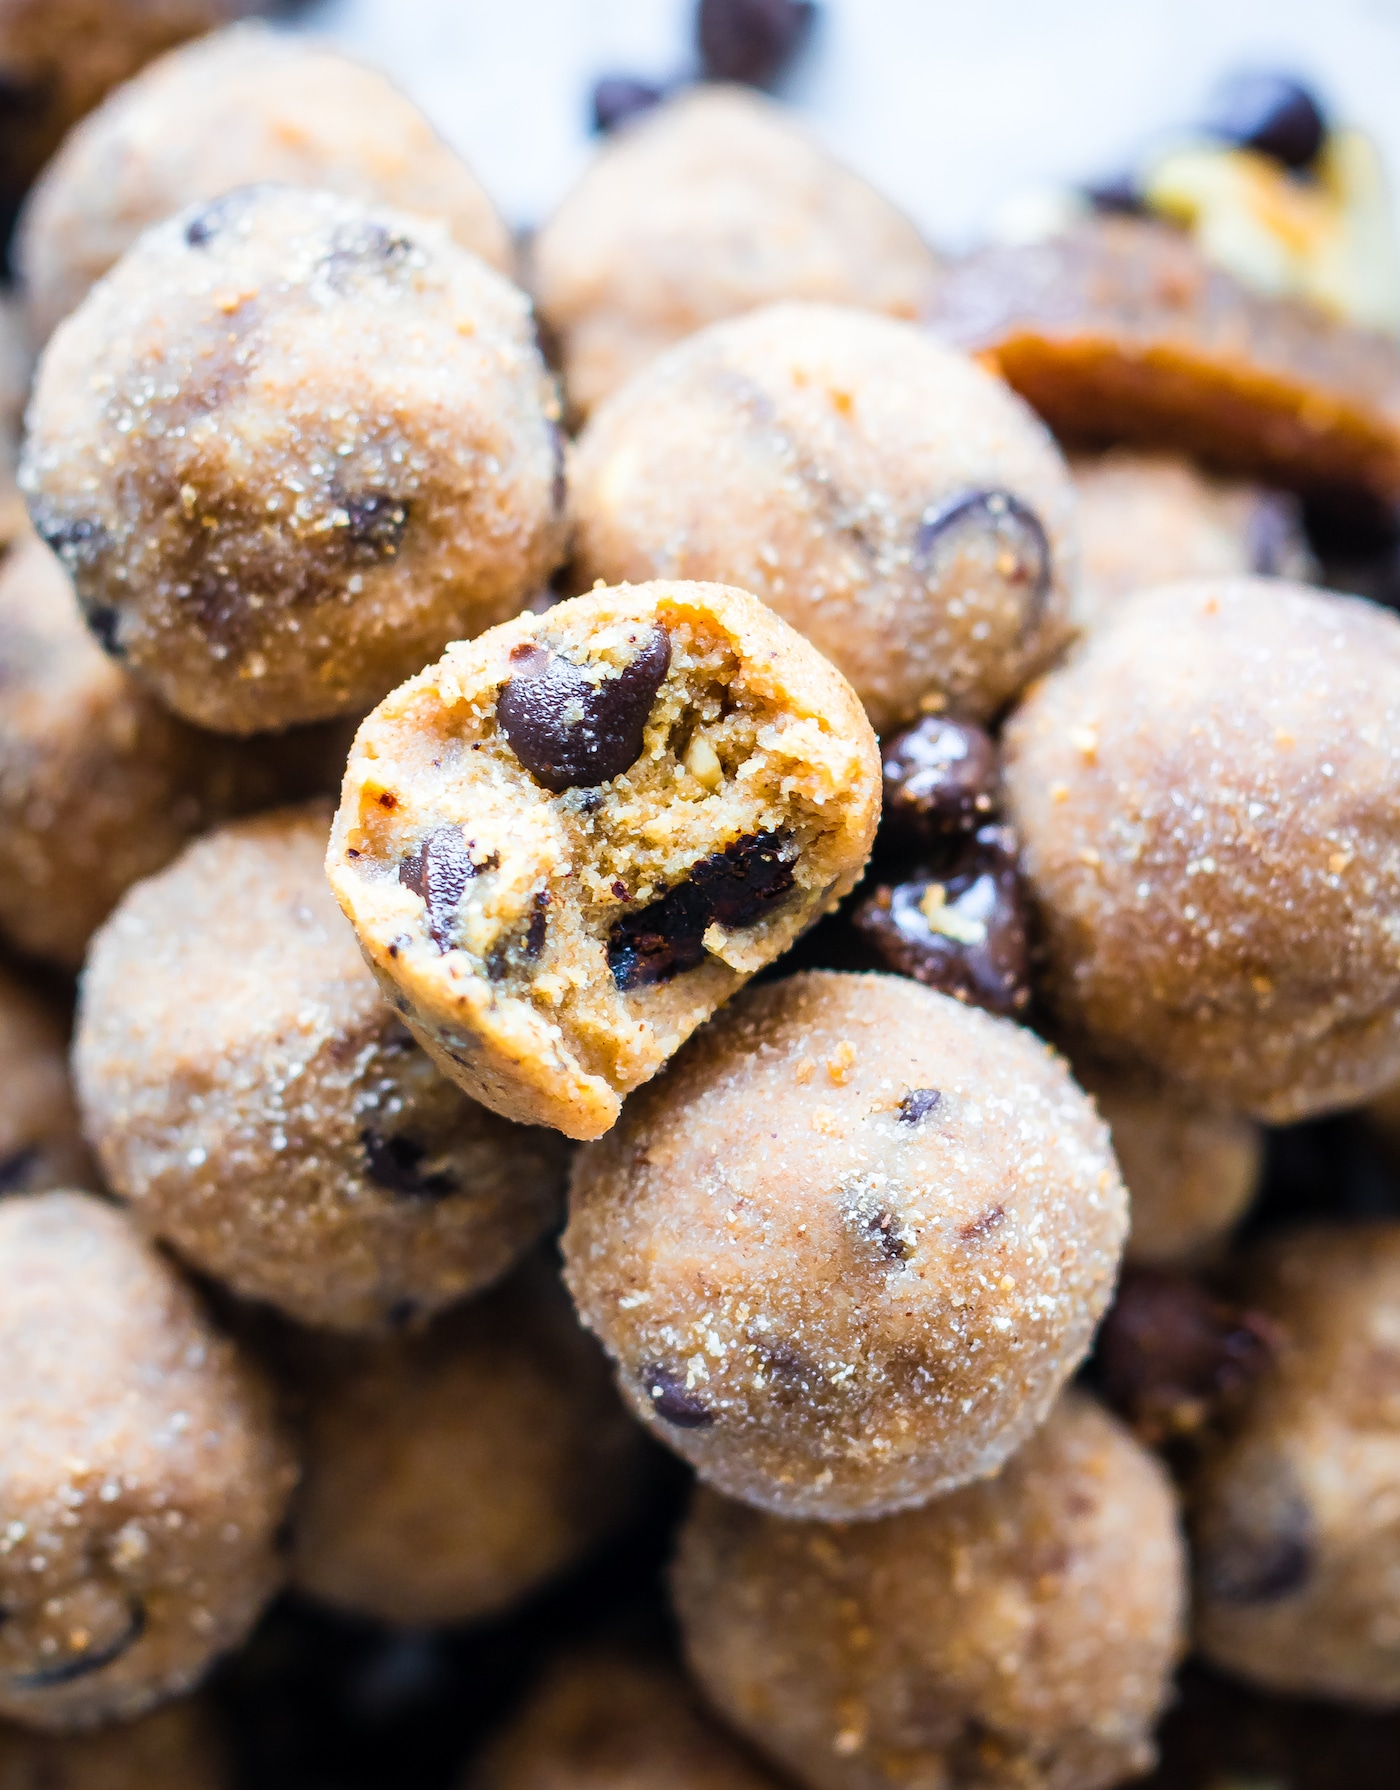 Chocolate Chip Toffee is just meant to be together! But what if we made it healthier? Yes, Maple Chocolate Chip Toffee Bites that are paleo friendly, no bake, and just plain delicious! A perfect bite size dessert to make for holidays or any time!